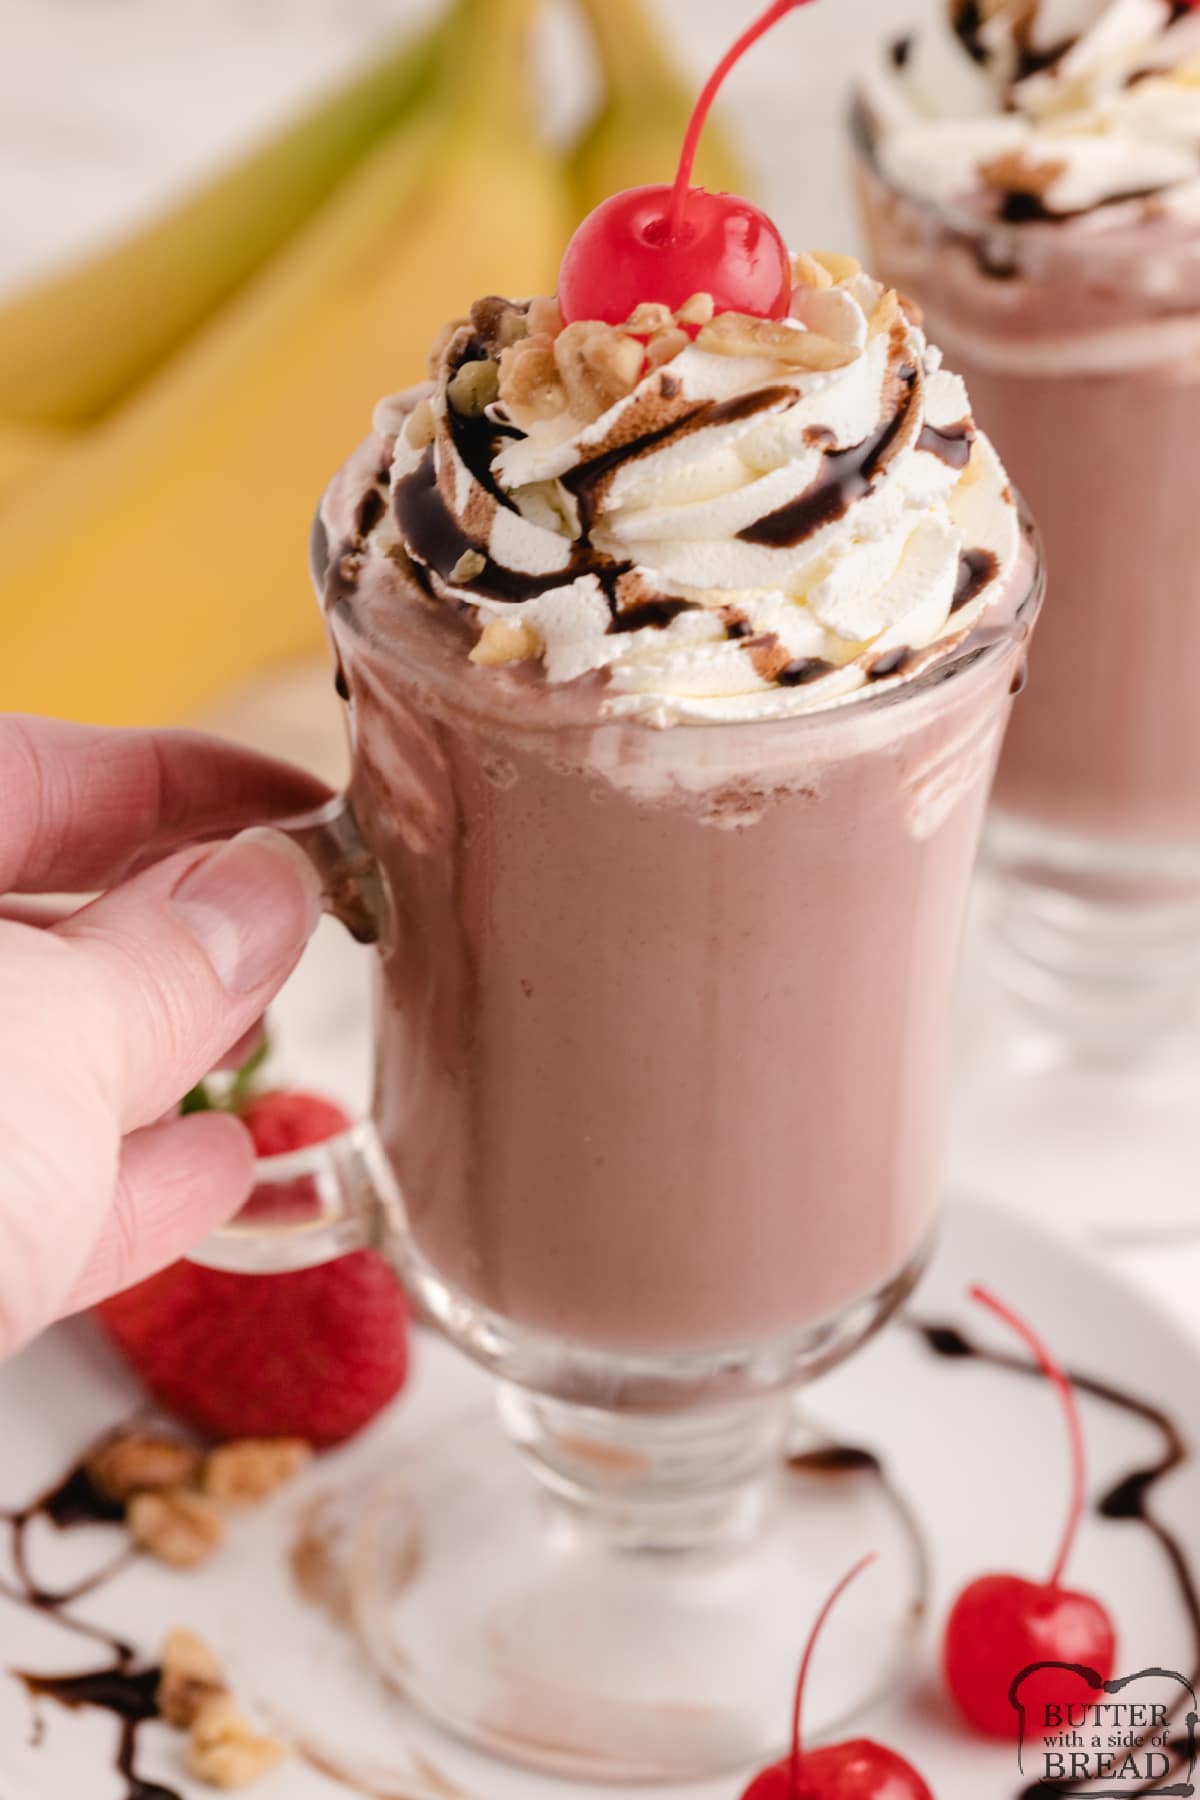 Banana Split Hot Chocolate tastes just like your favorite banana split dessert, but in a mug! Made with hot cocoa mix, bananas, whipped cream, cherries and nuts. 